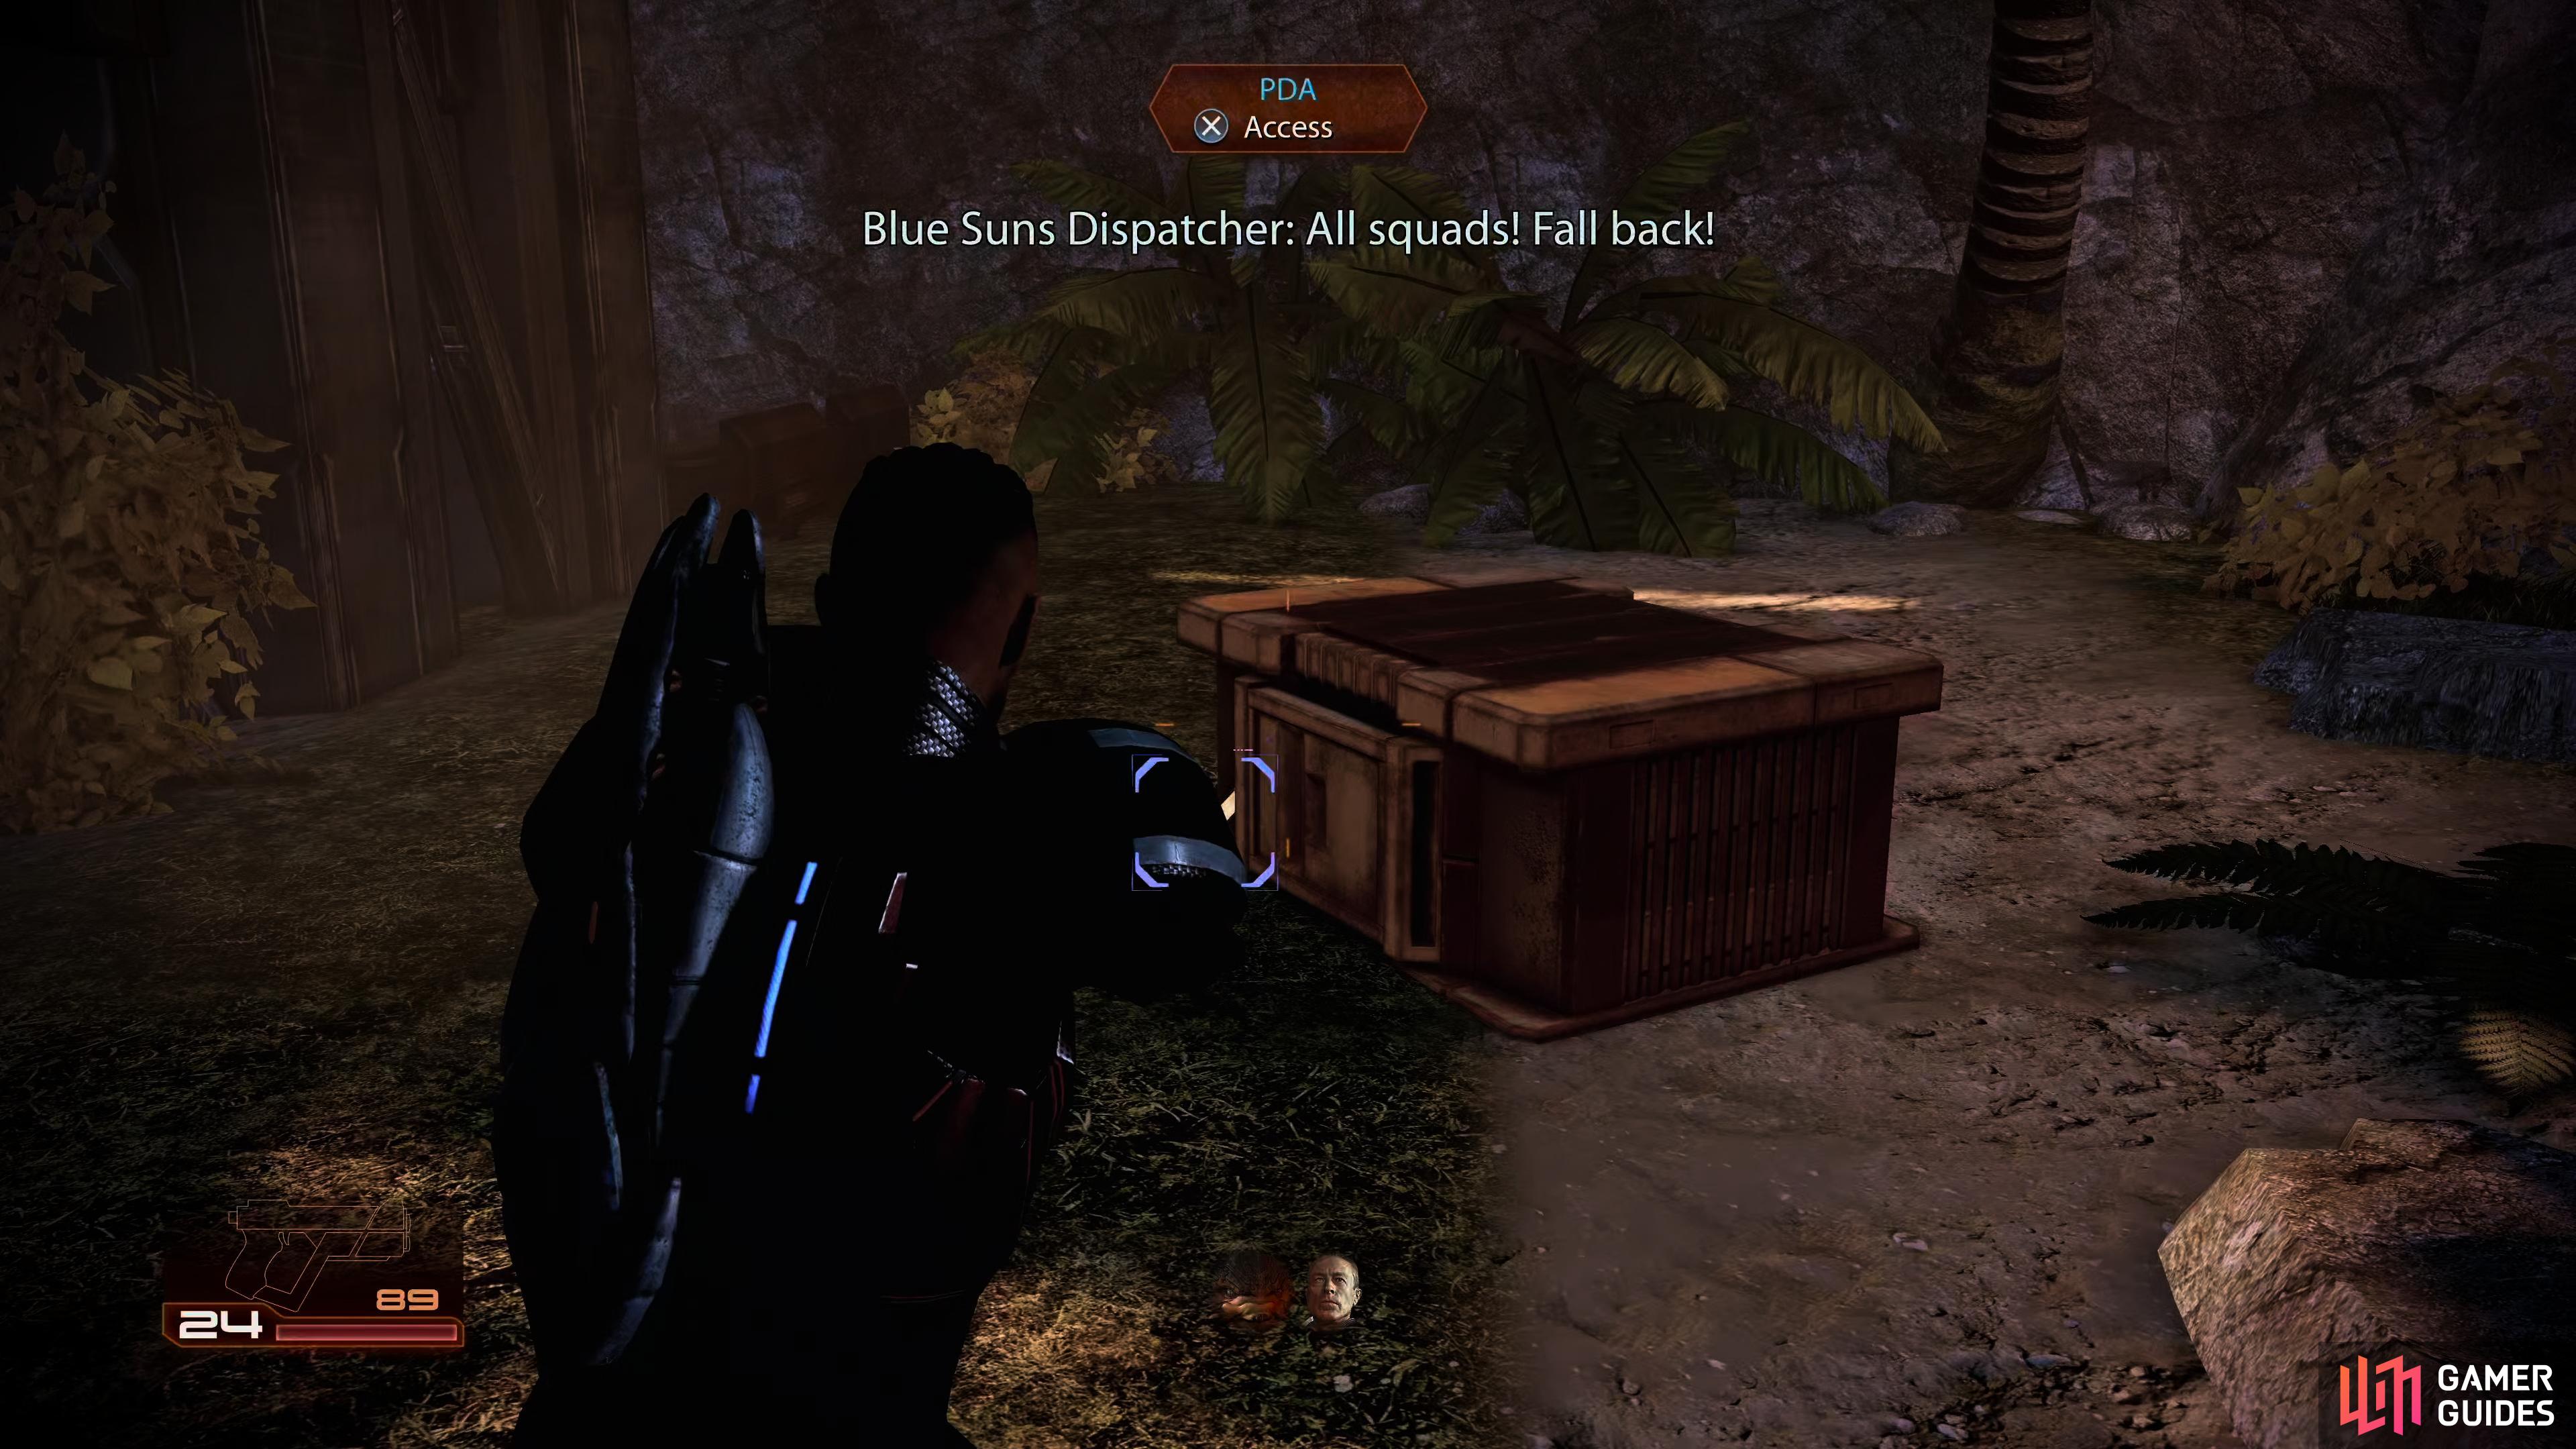 After the encounter, you can find a PDA for 6,000 Credits in the corner by a crate.